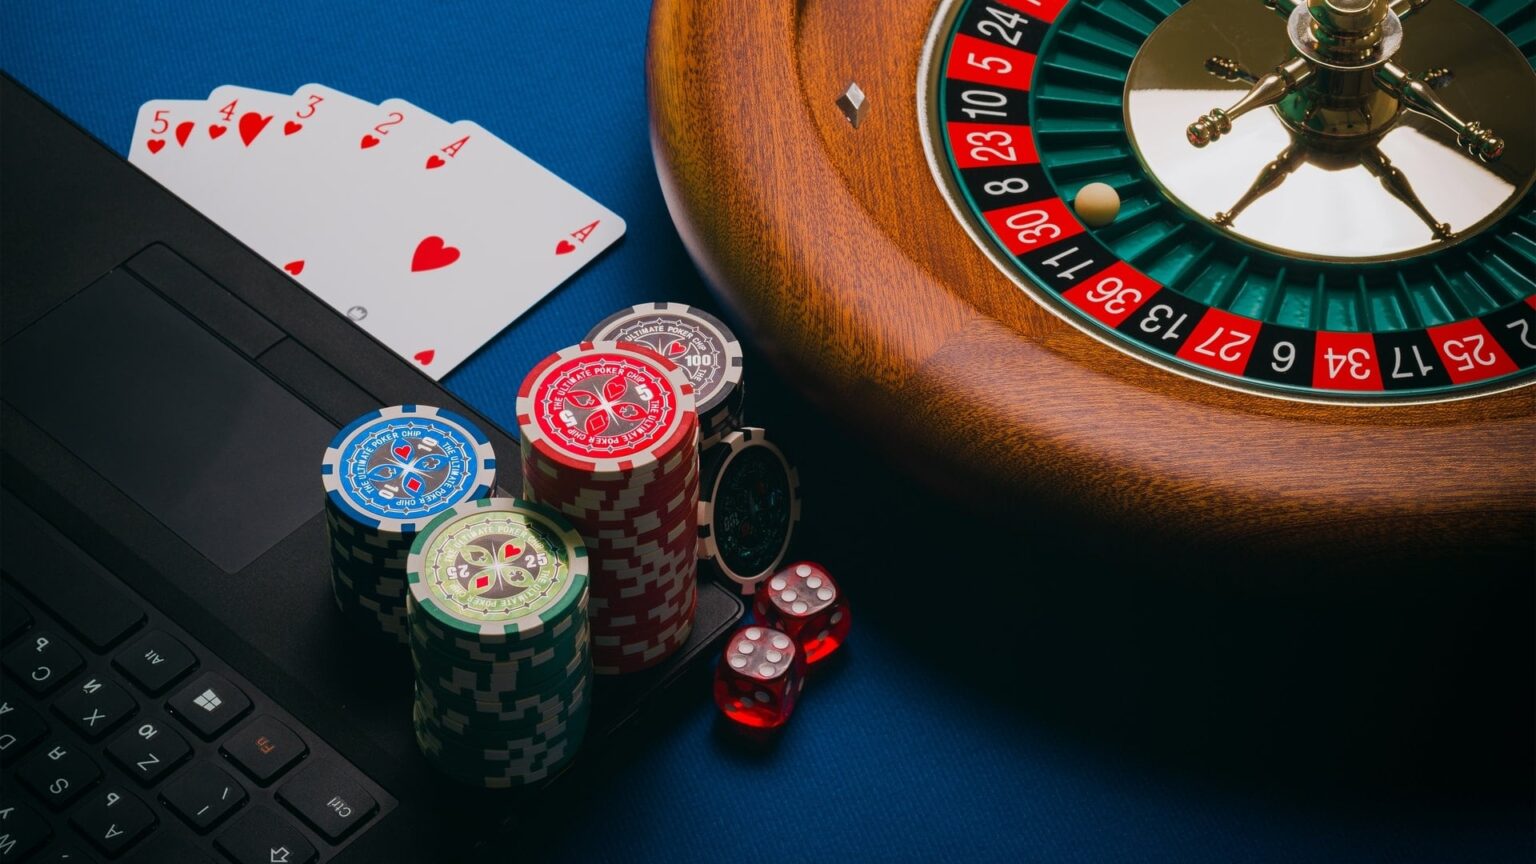 Learn more about safety and security measures at Bruce Bet casino, alongside their perspective on responsible gambling. Read on to find out more!